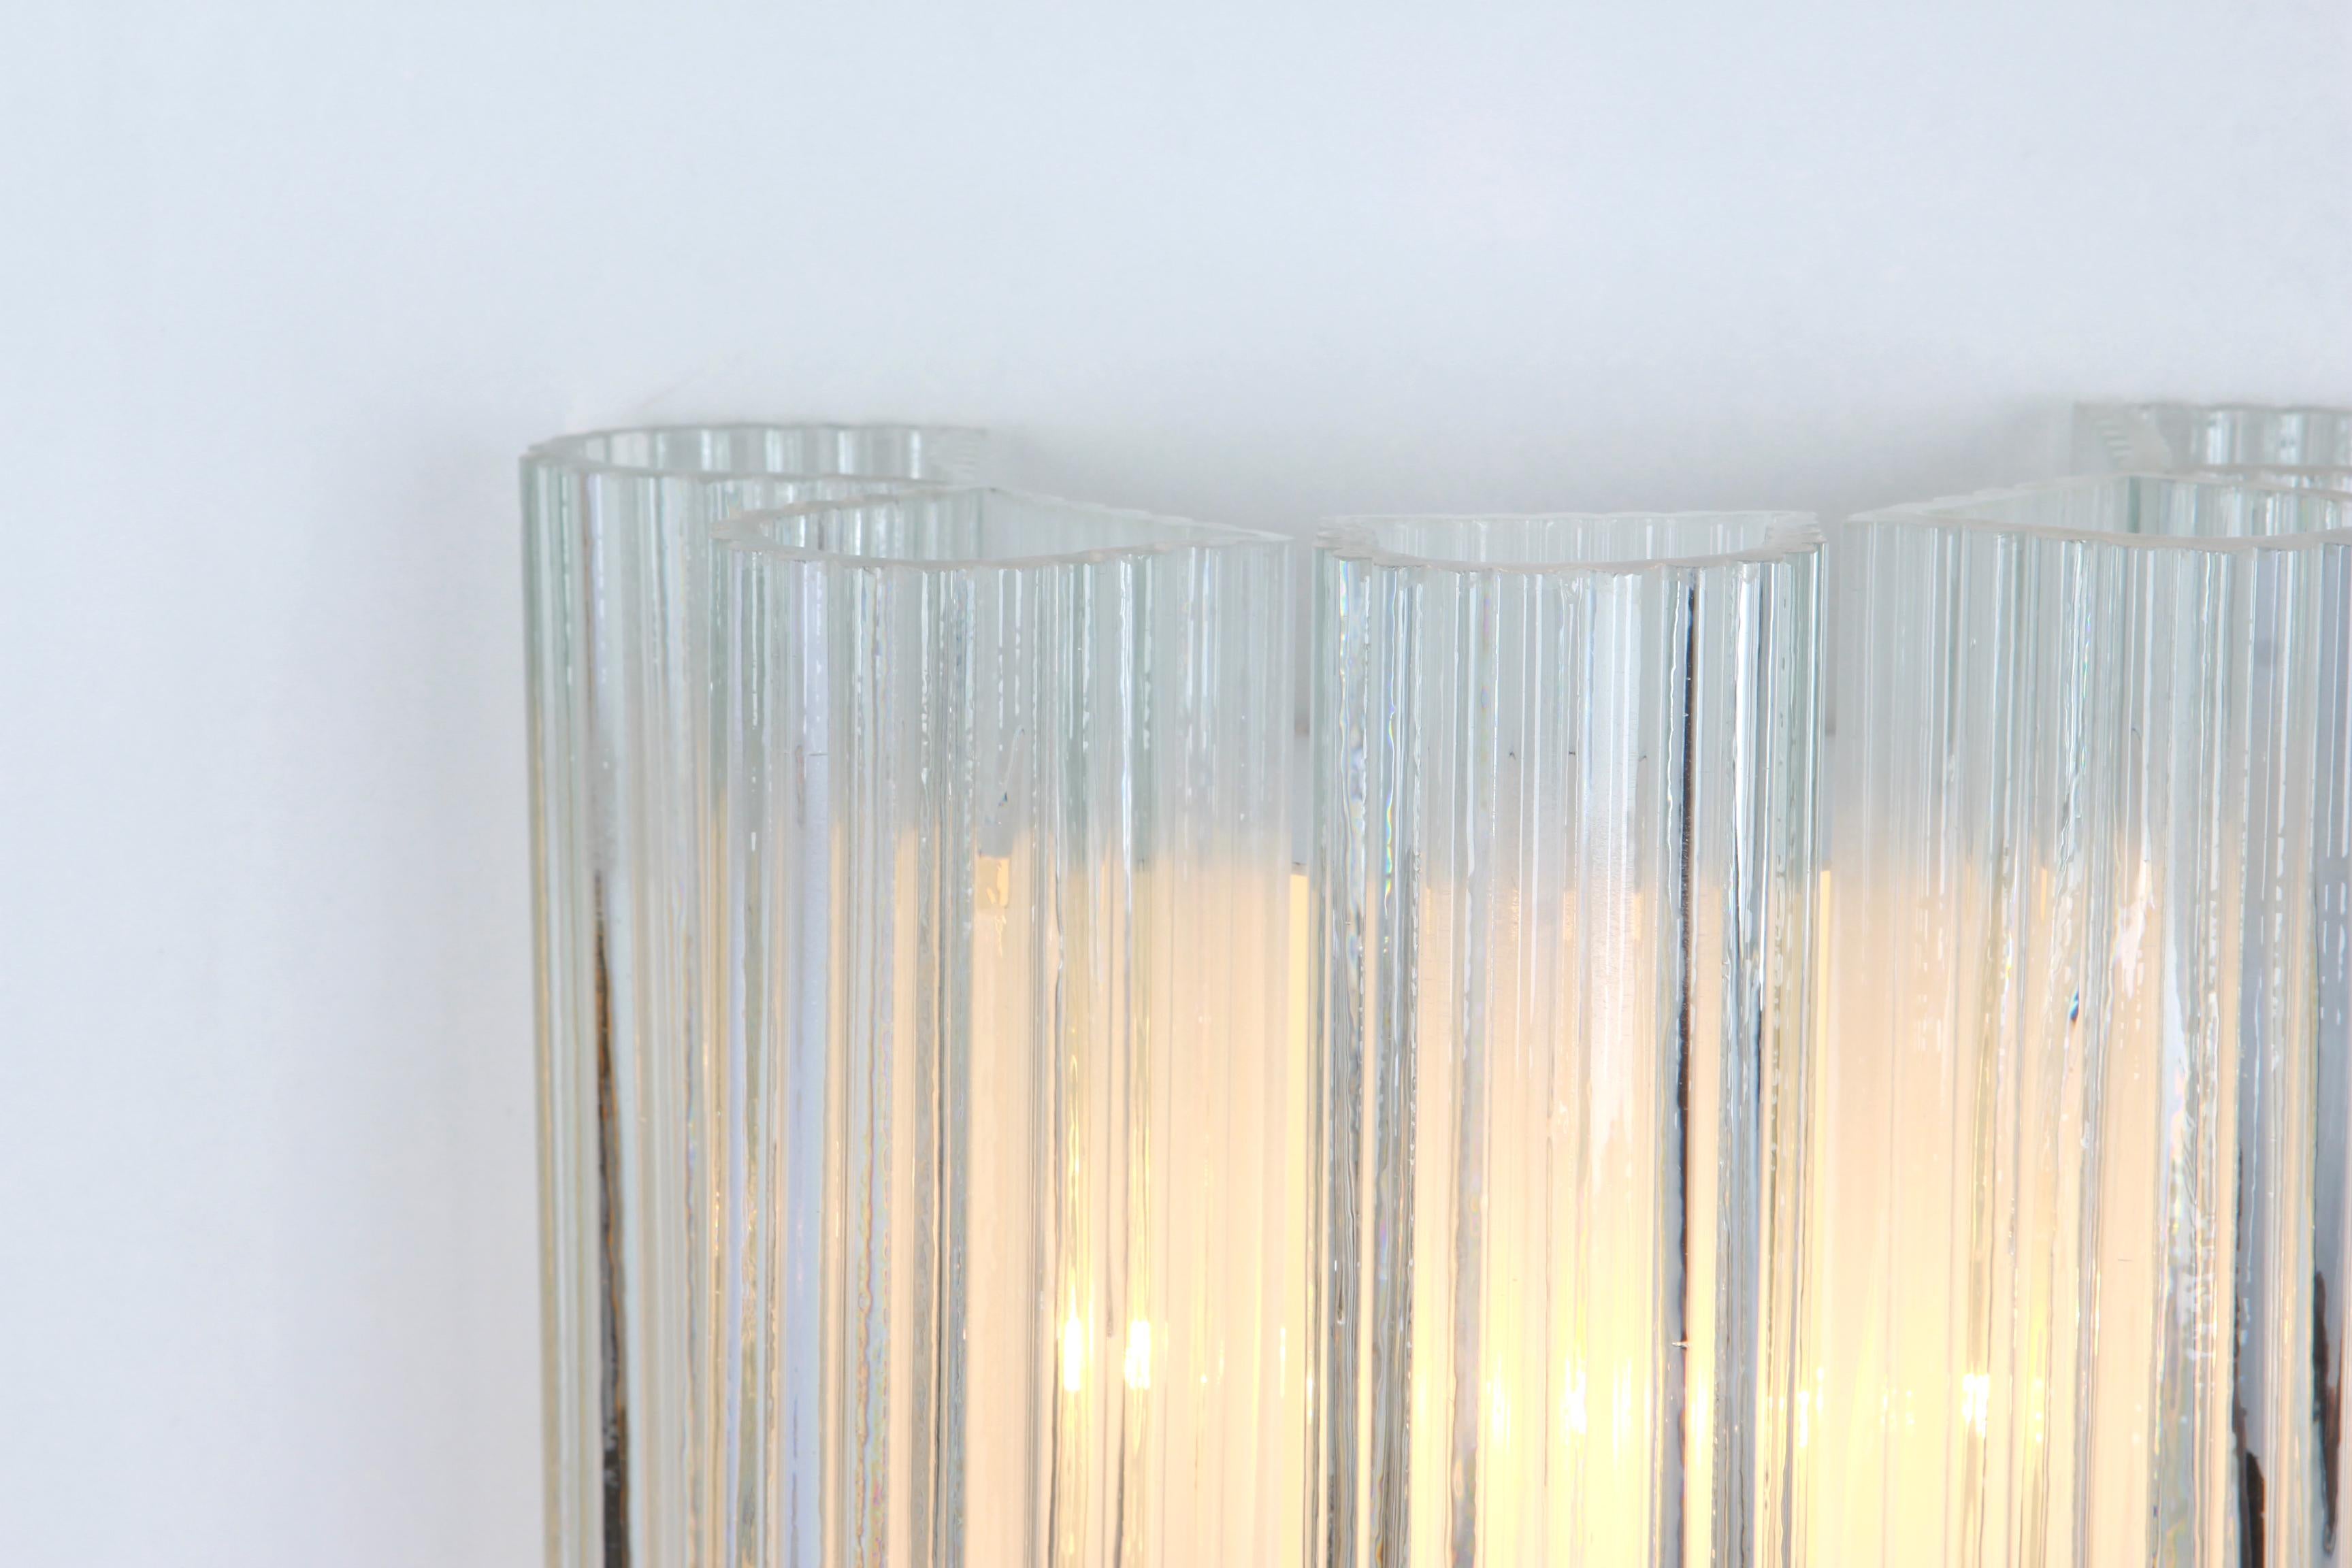 1 of 4 Large Murano Glass Wall Sconces by Doria, Germany, 1960s For Sale 3